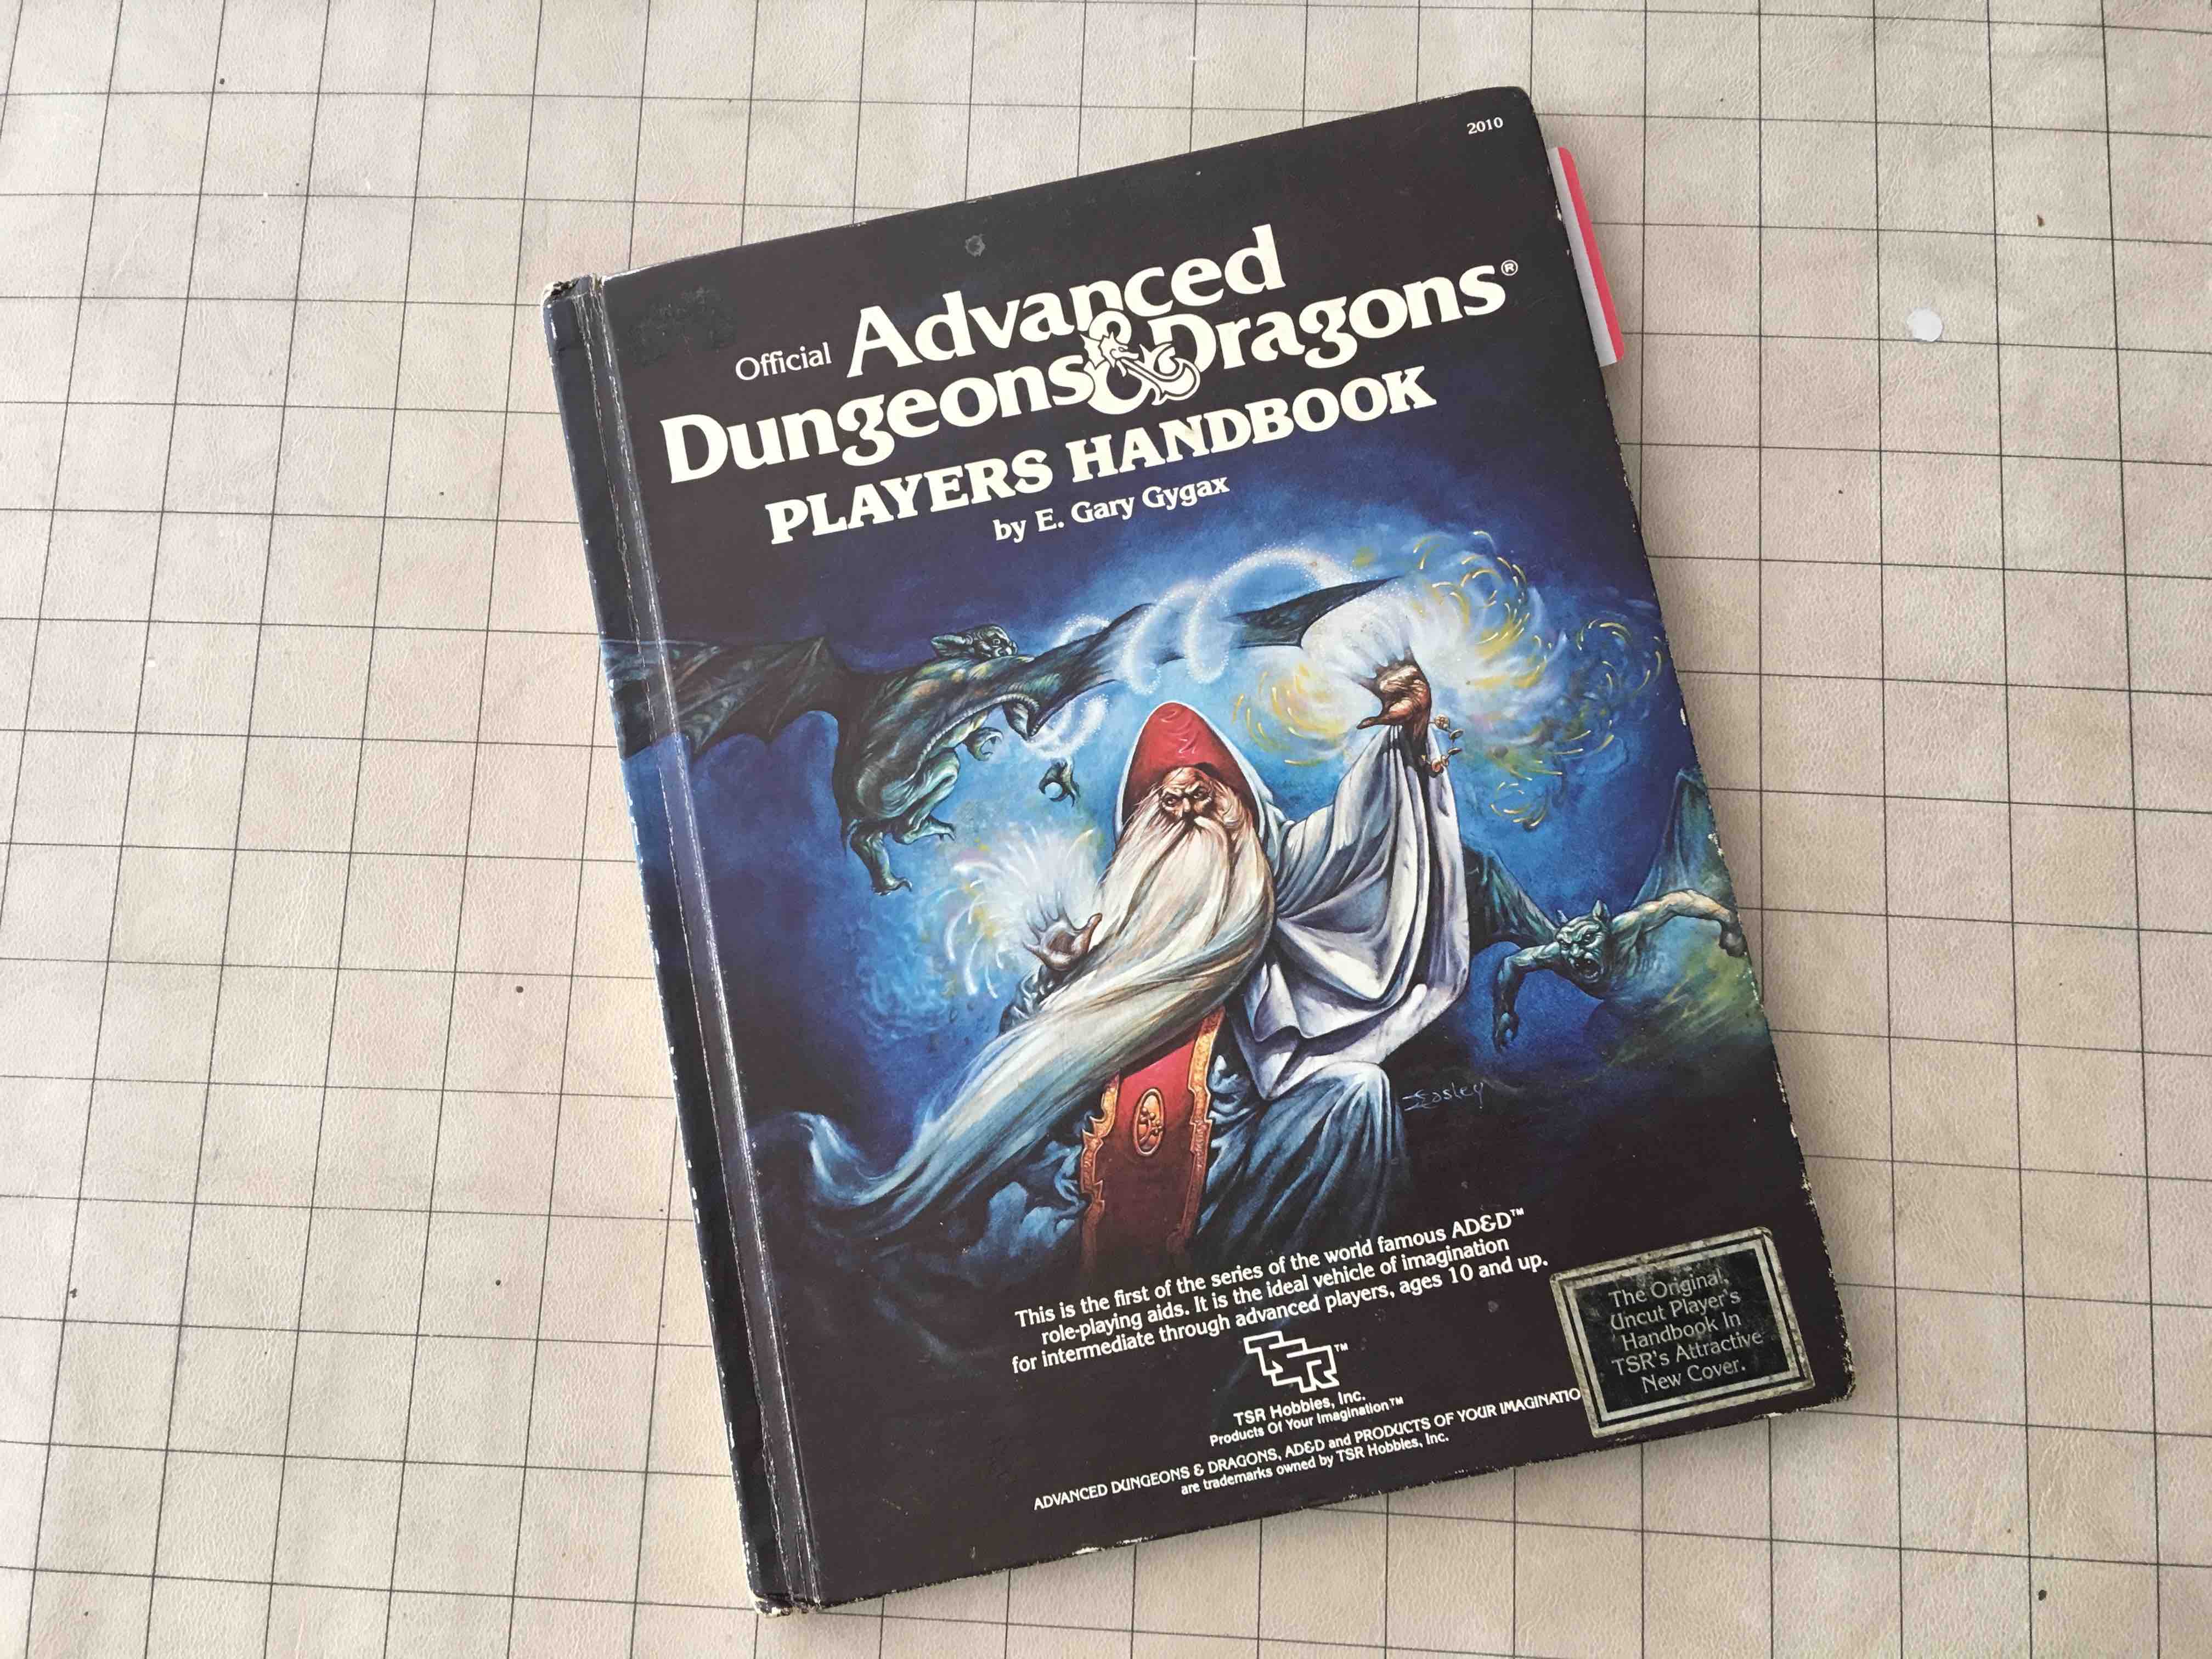 My First Gaming Book